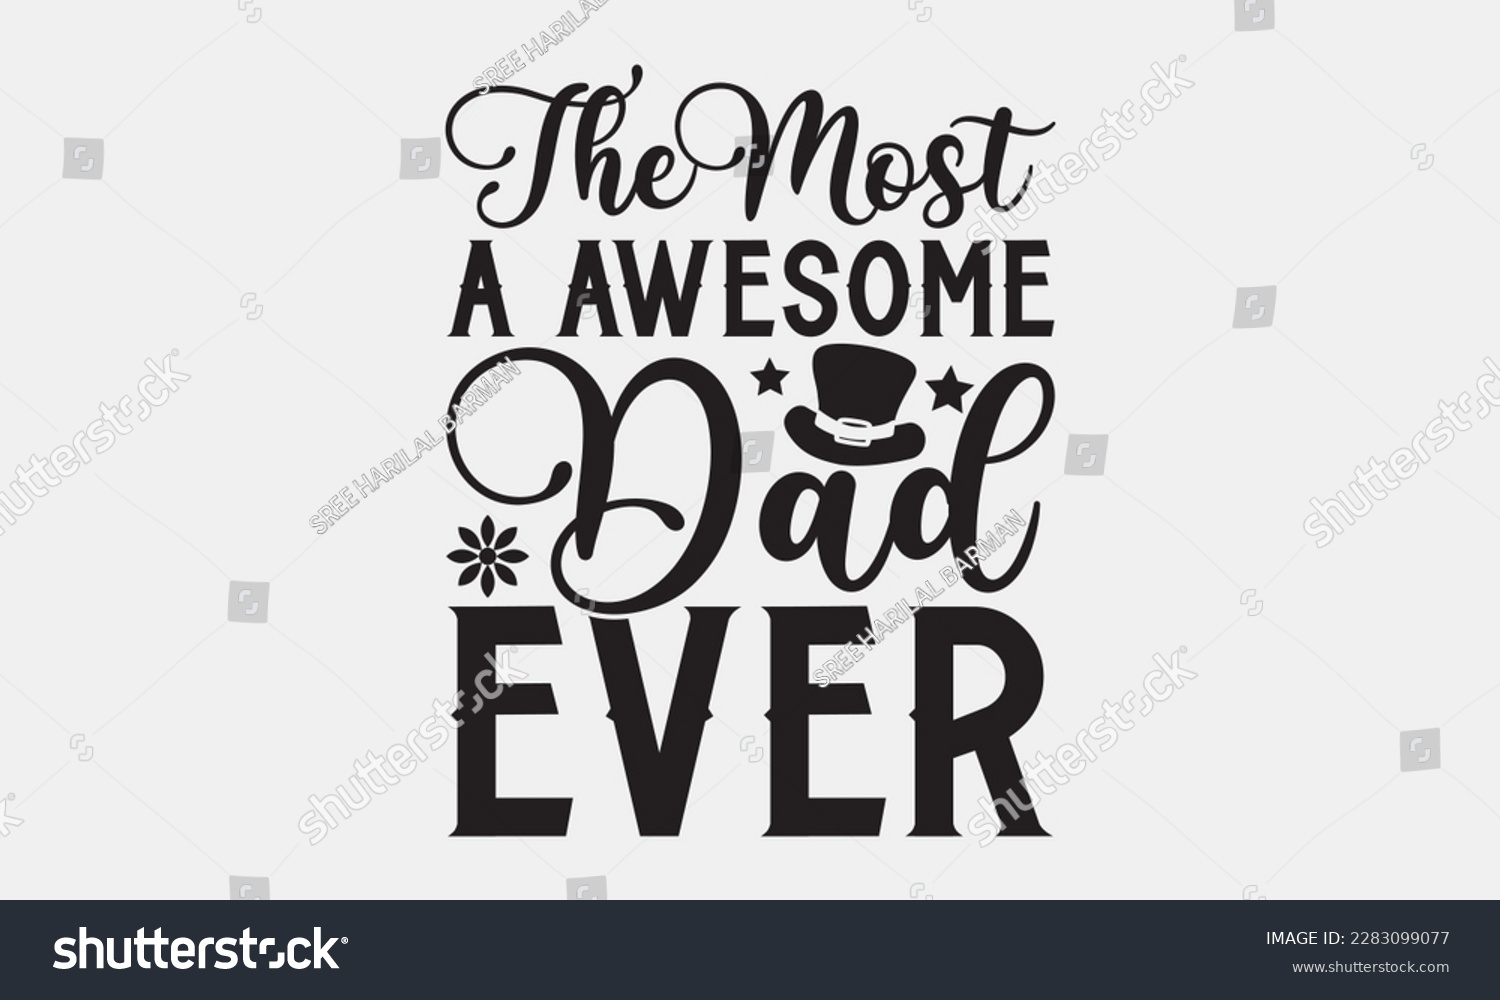 SVG of The most a awesome dad ever - Father's day svg typography t-shirt design. celebration in calligraphy text or font means Jun father's day in the Middle East. Greeting templates, cards, mugs, brochures. svg